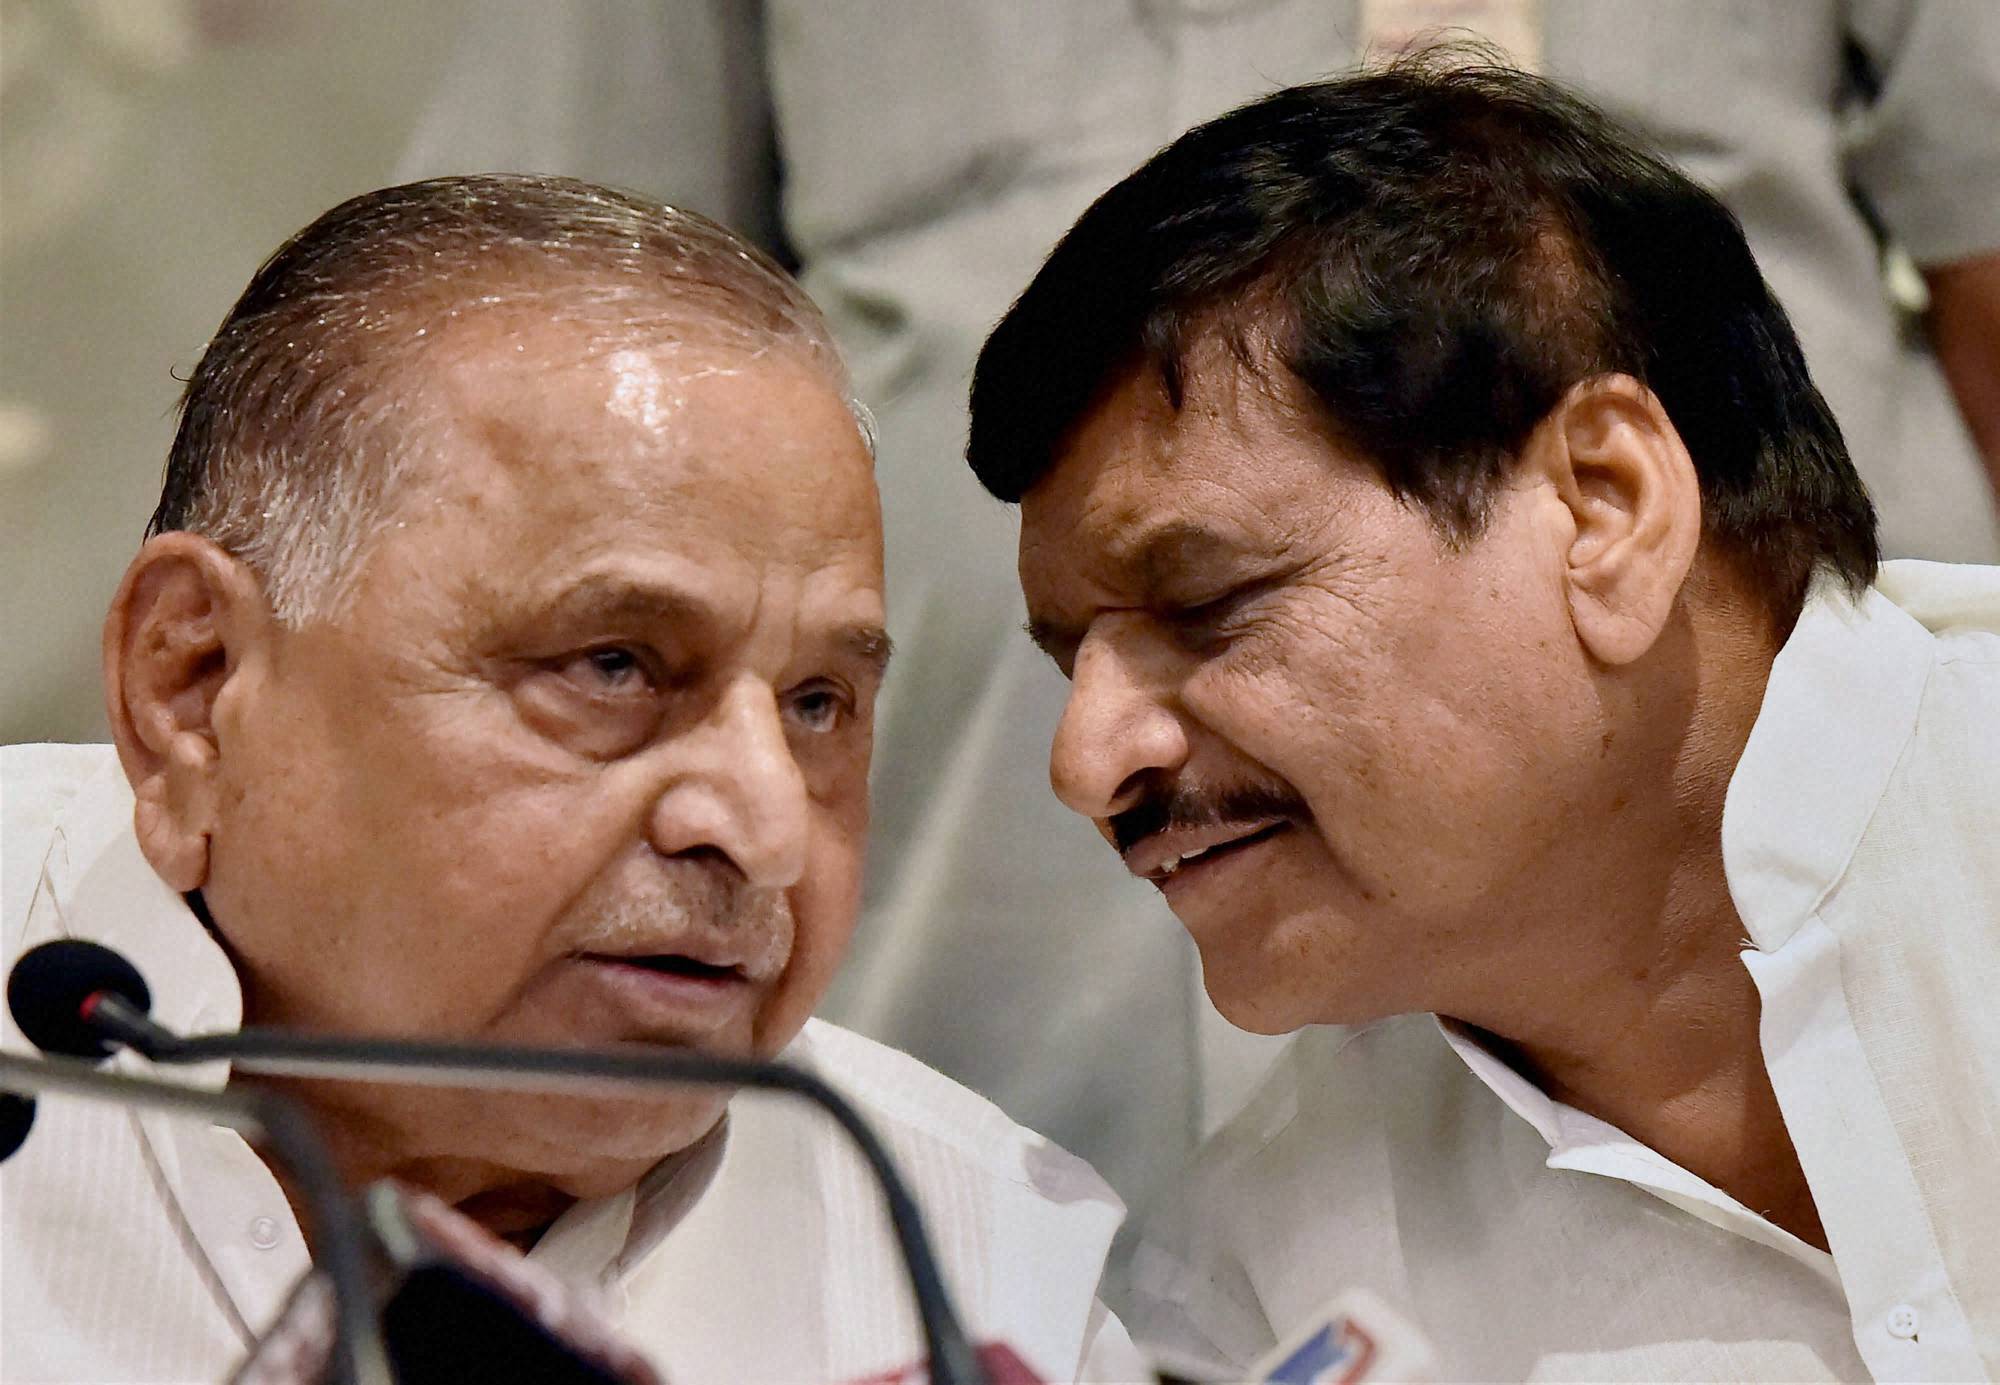 Samajwadi Party's chief ministerial candidate to be decided by party legislature: Mulayam